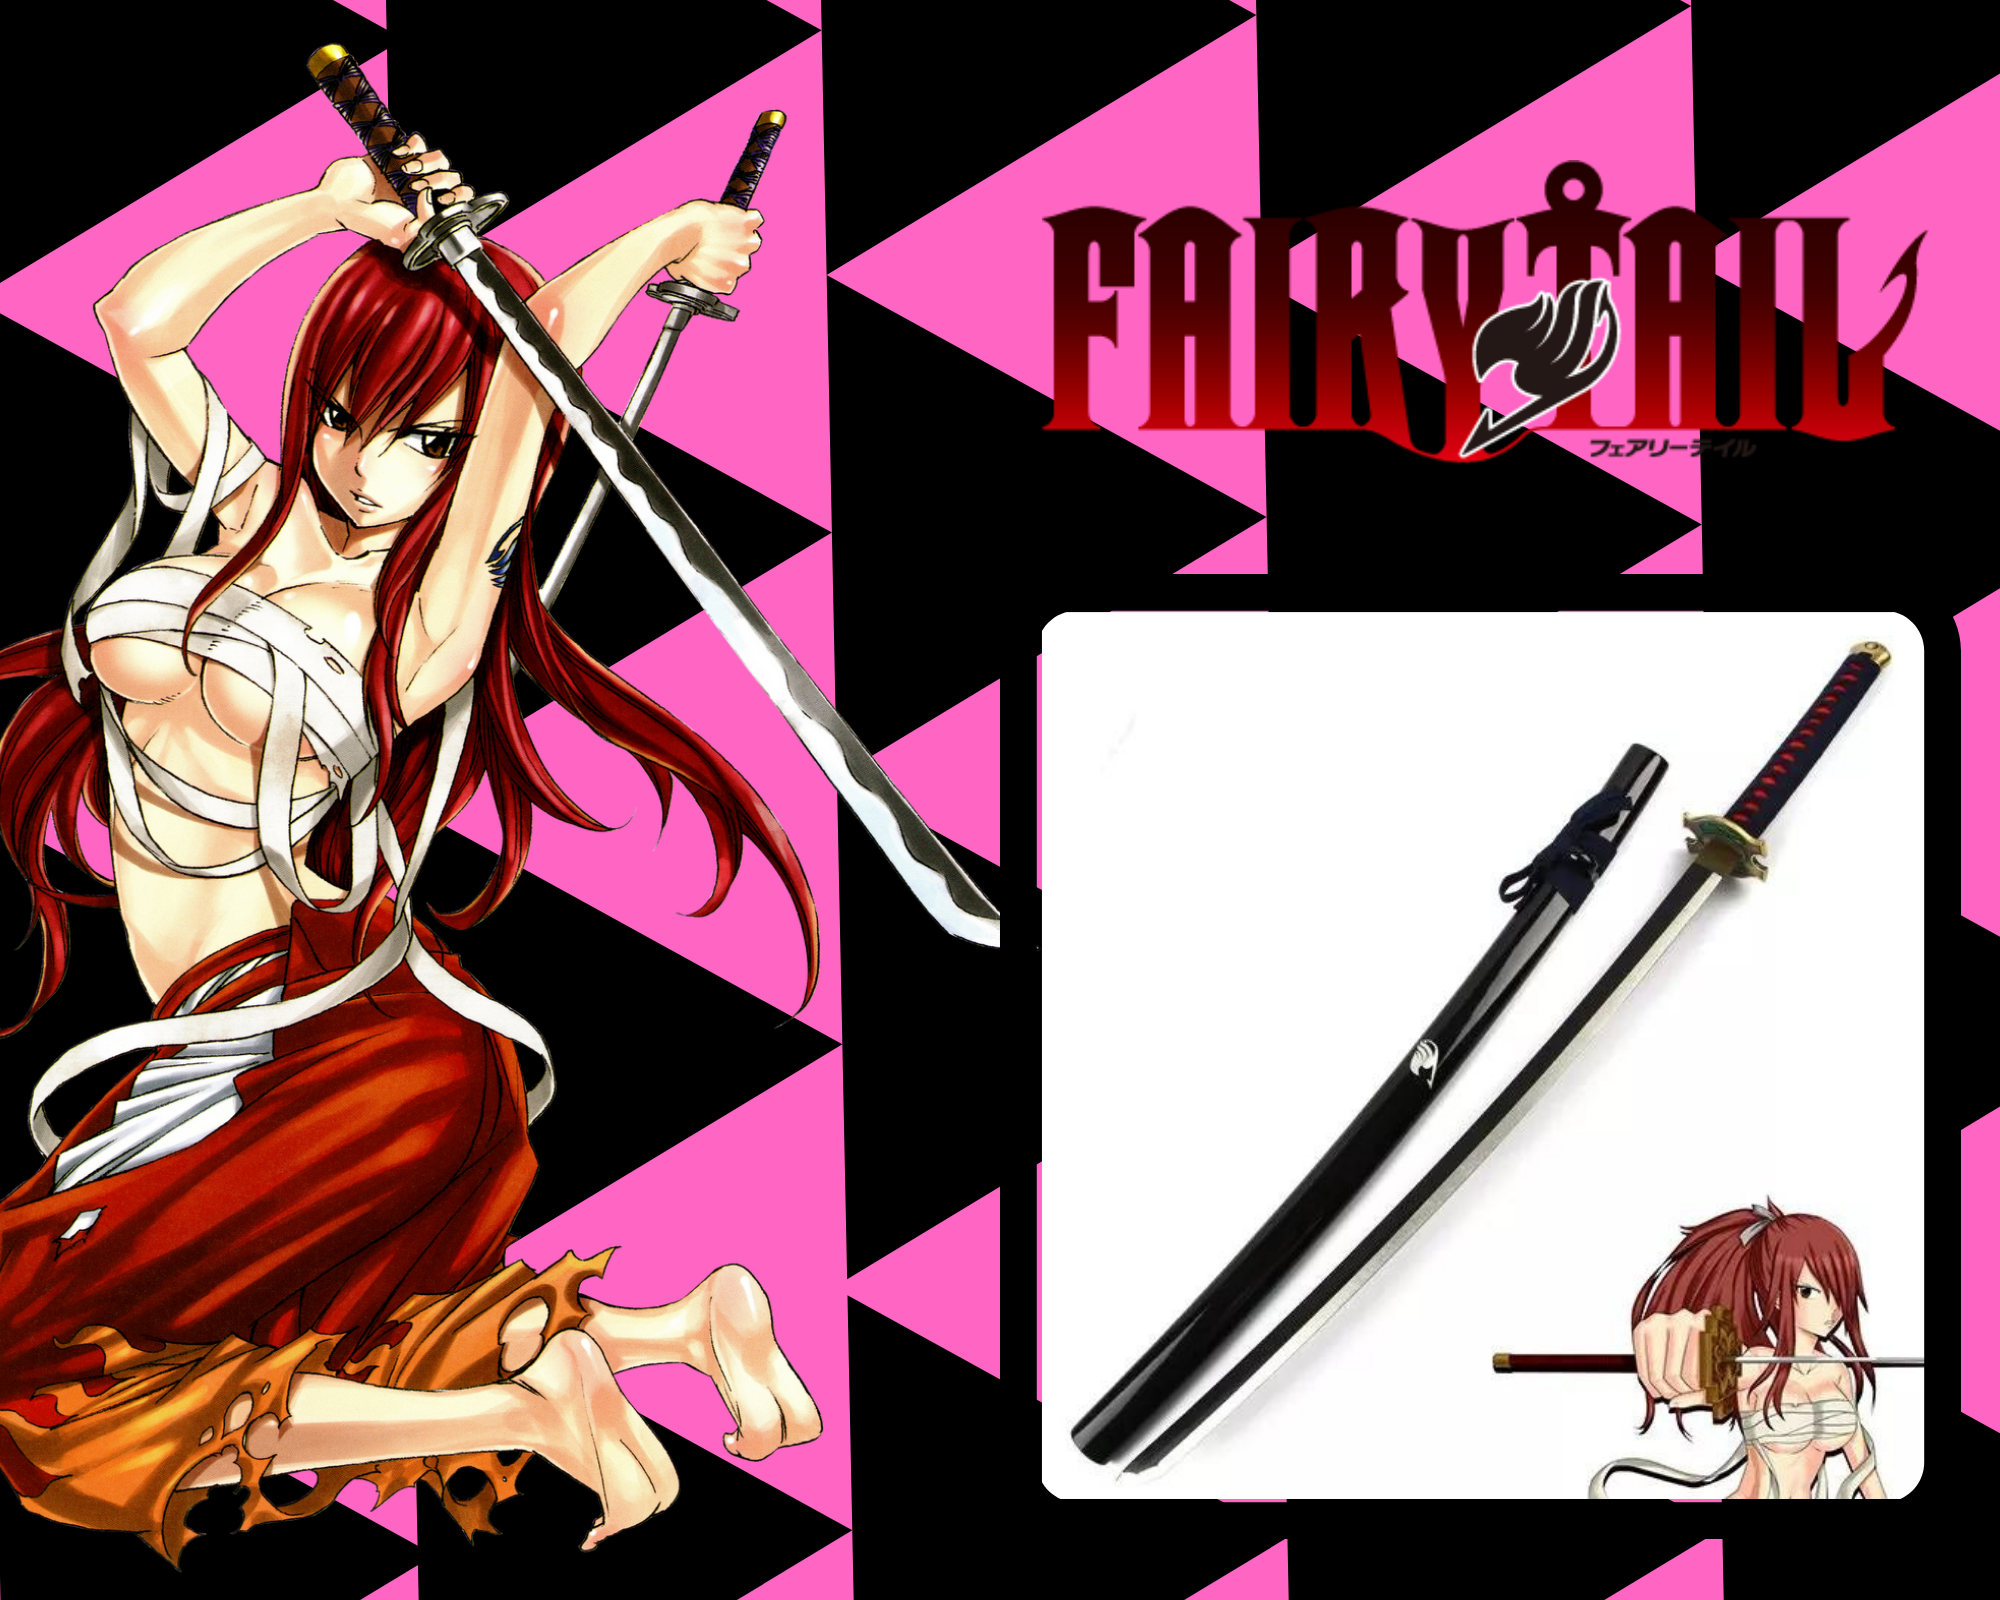 ERZA WOODEN SWORD FAIRY TAIL